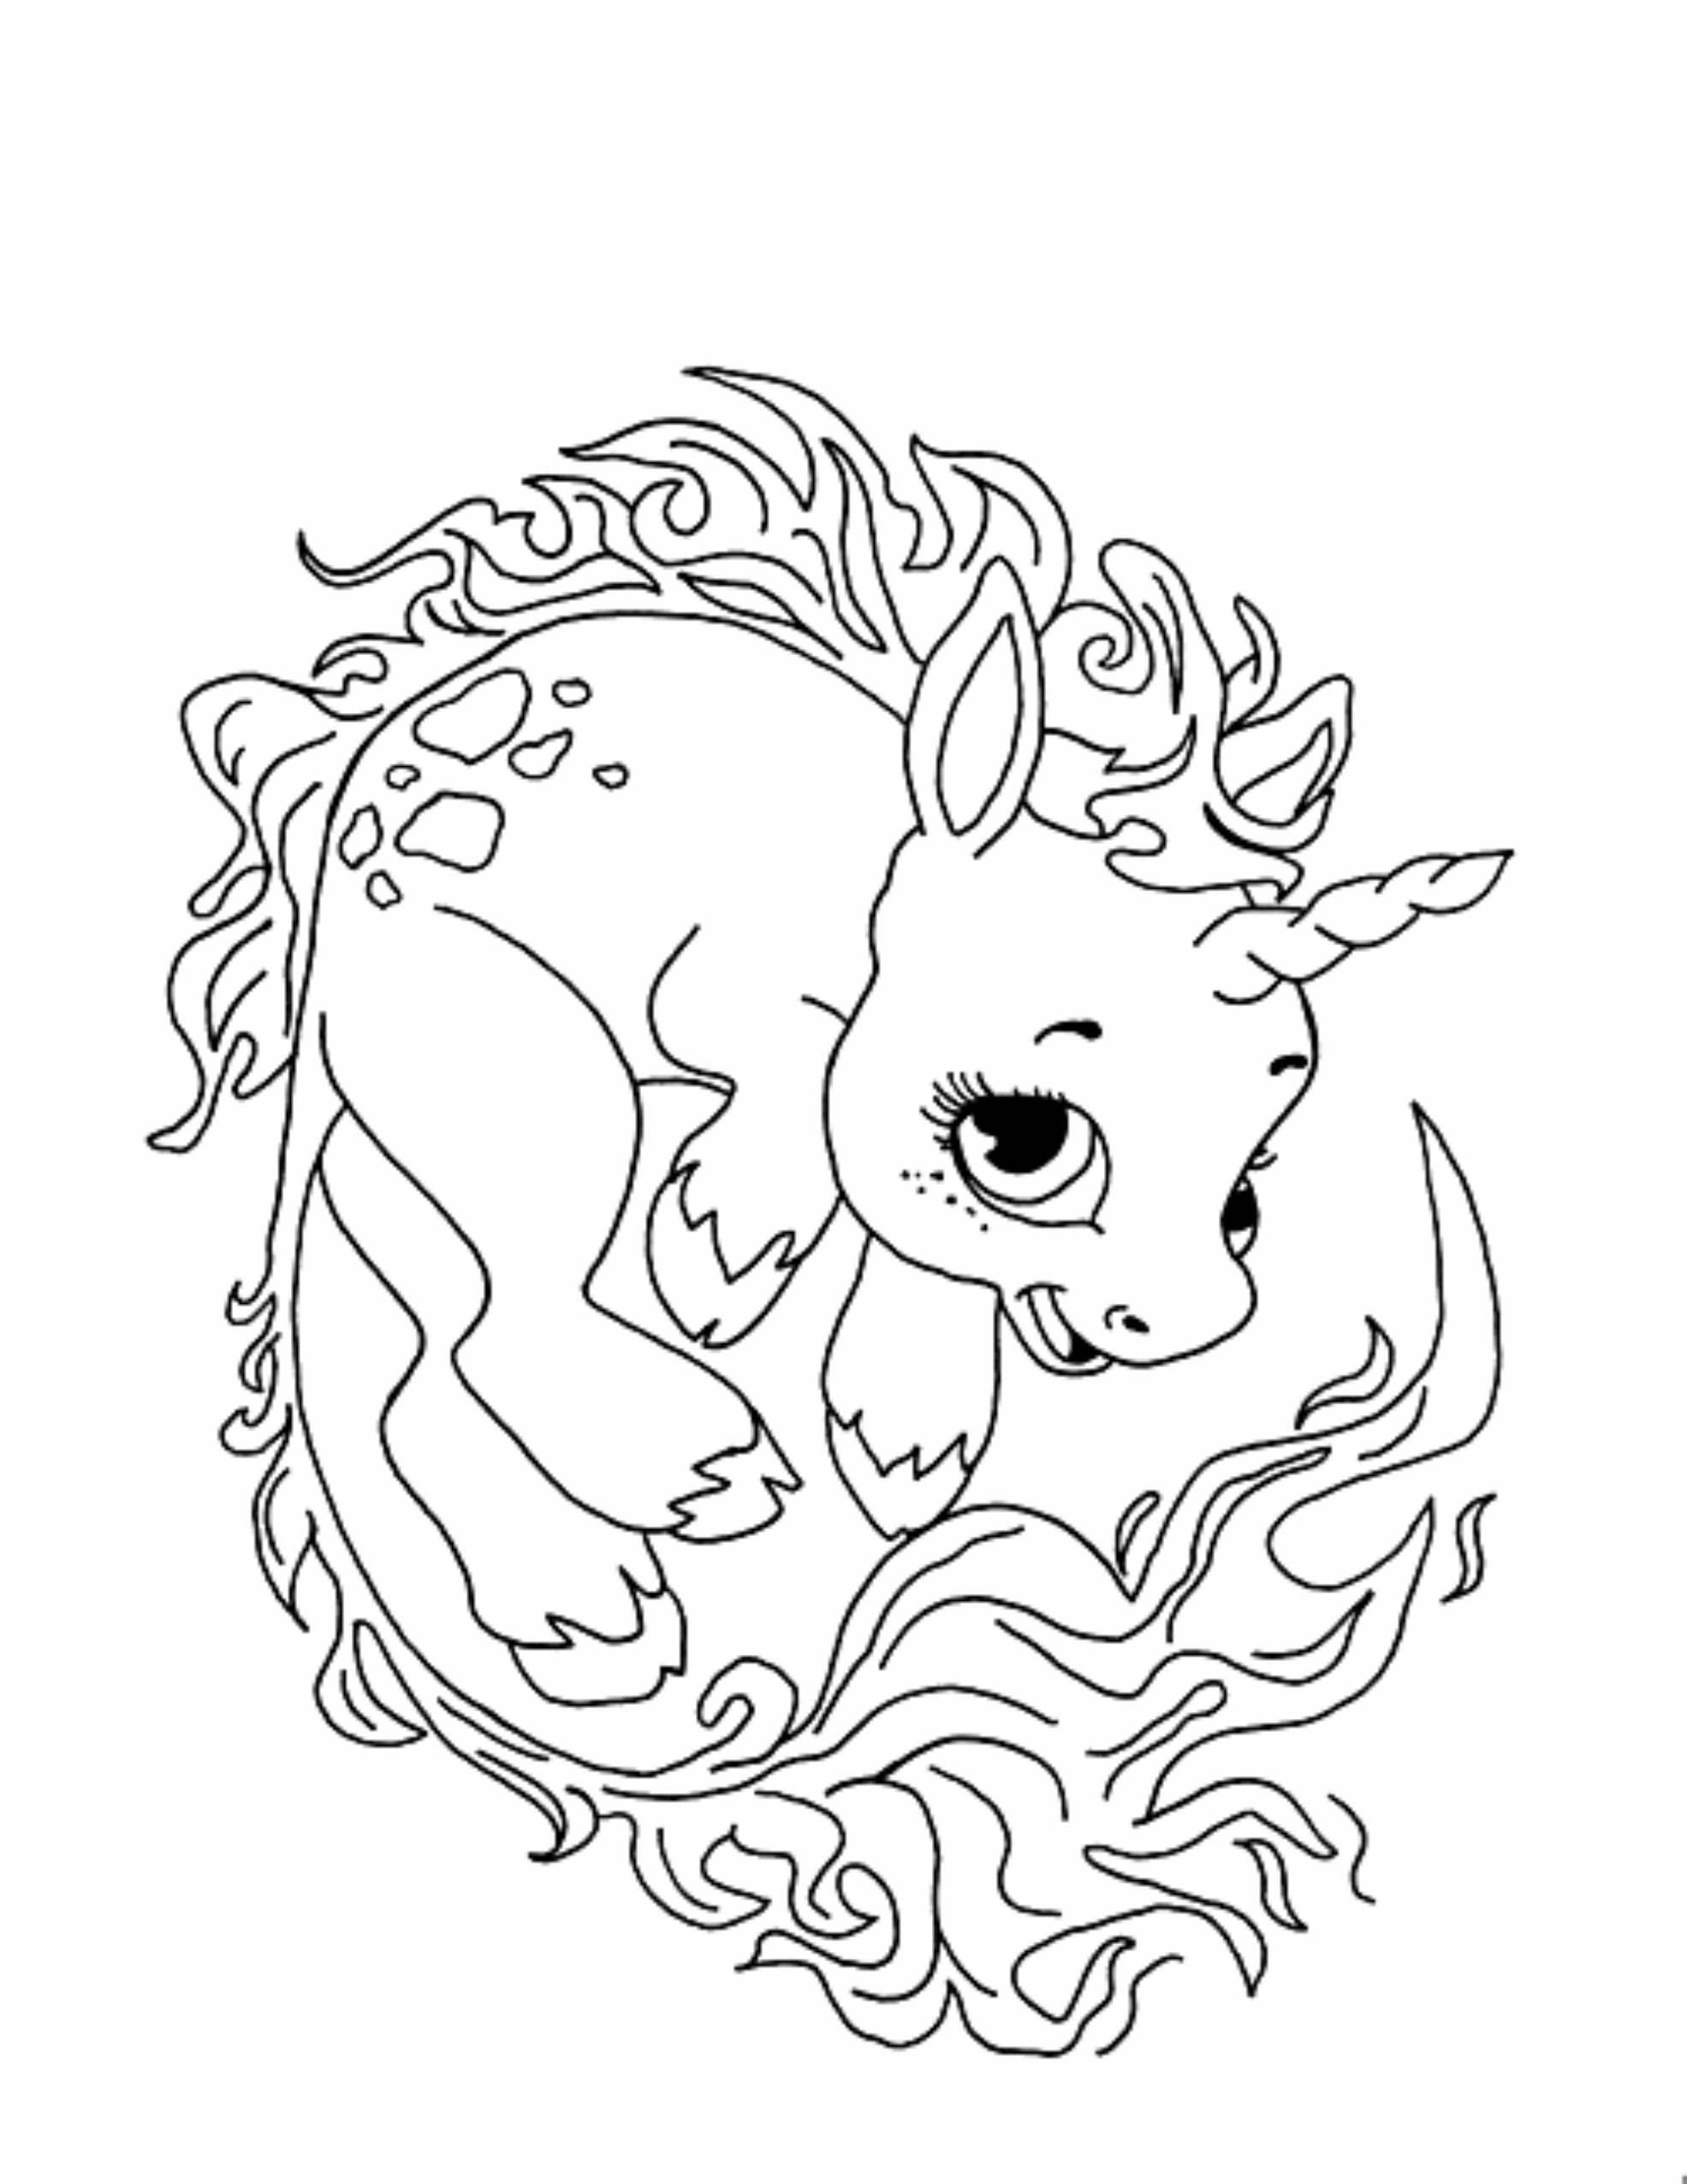 Kawaii Coloring Pages Free New Extraordinary In Unicorn Coloring Page with Hd Pages Free Best Unicorn